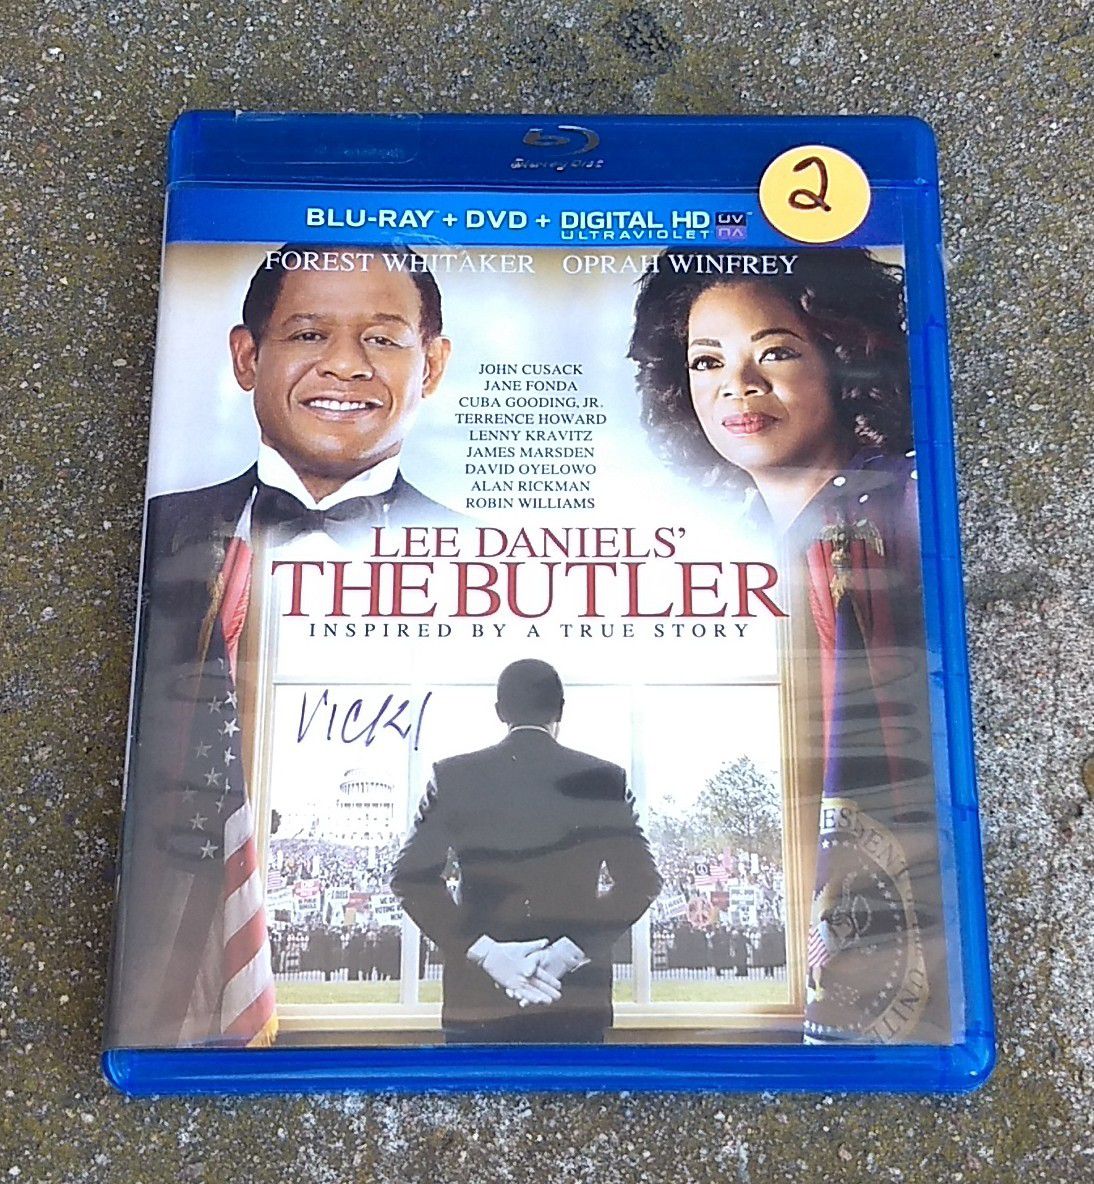 Lee Daniels The Butler Blu-ray and DVD